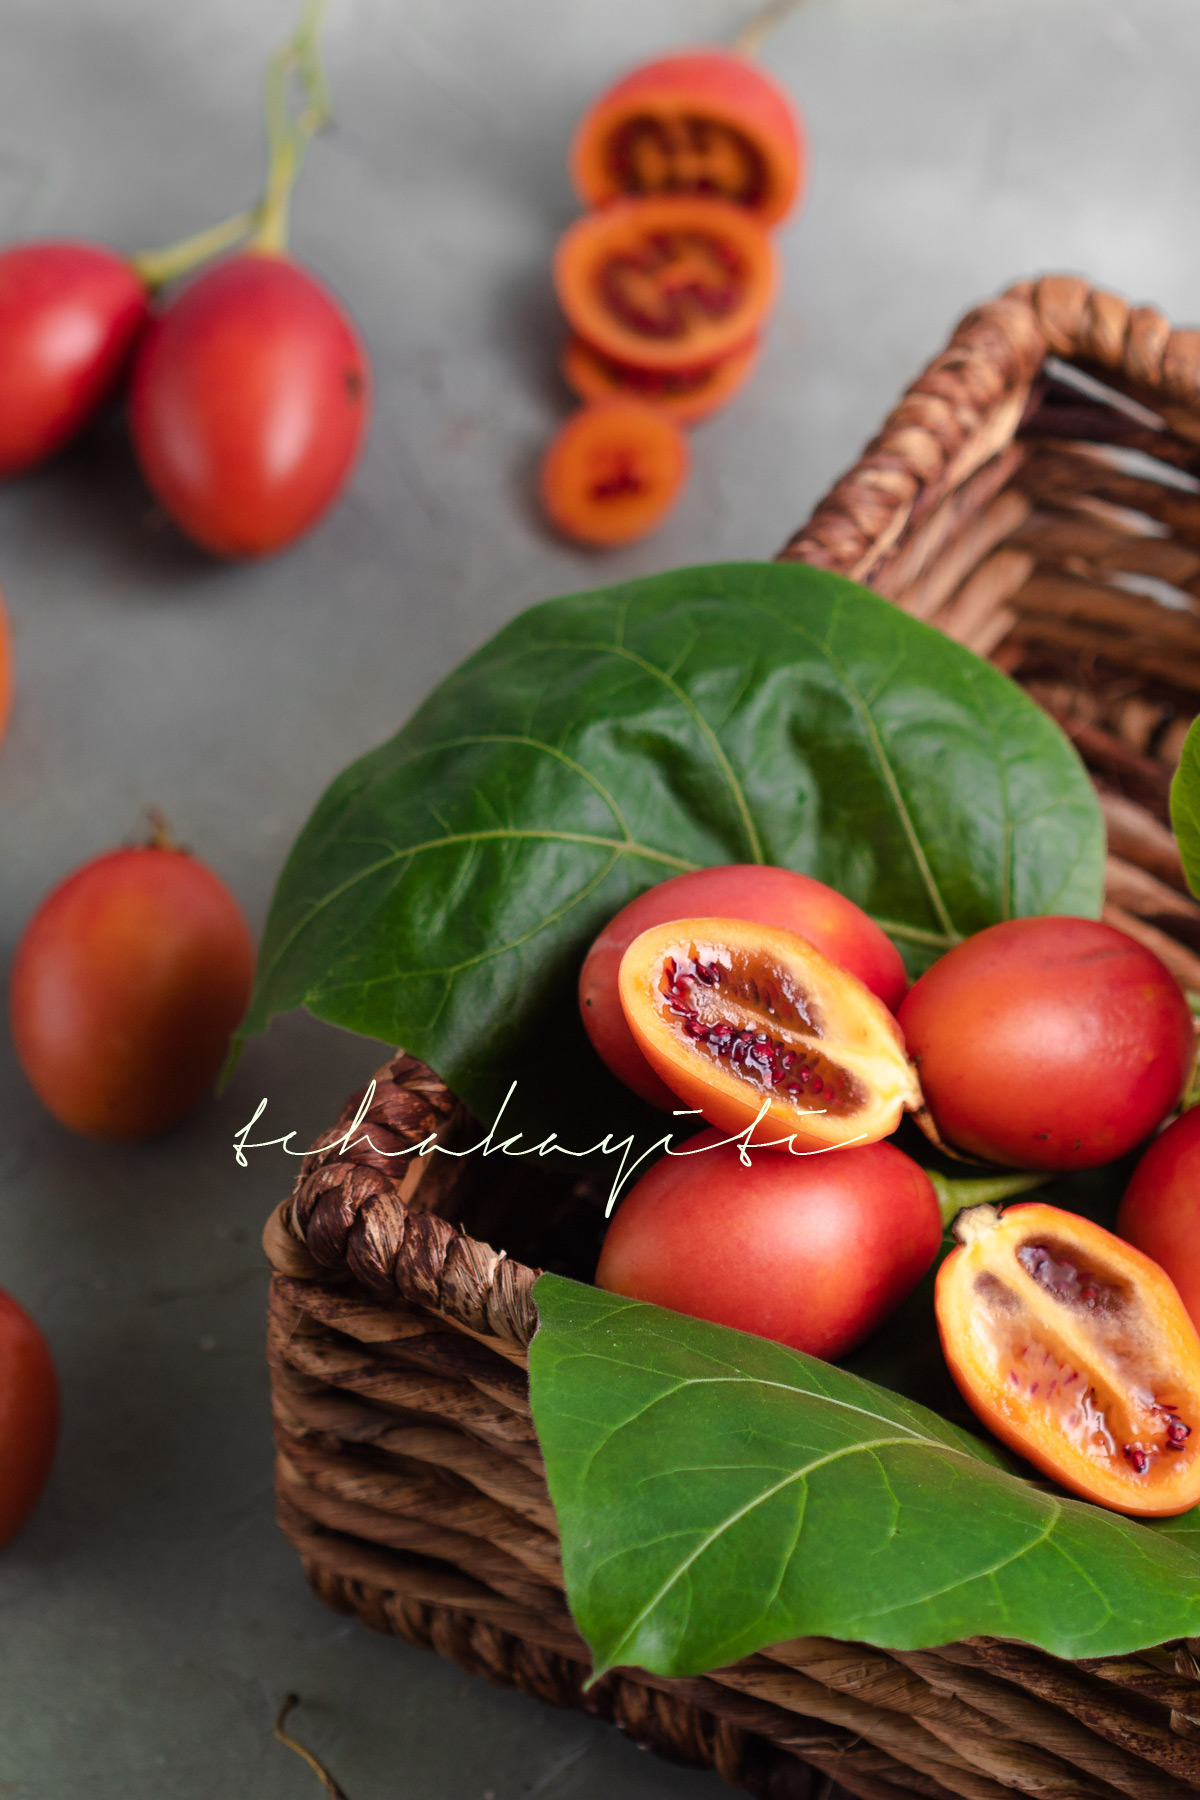 Tamarillos, also known as tree tomato, make for a bizarre fruit. Sweet and perfumy, their flesh may remind you of a distant cousin of tomatoes. | tchakayiti.com